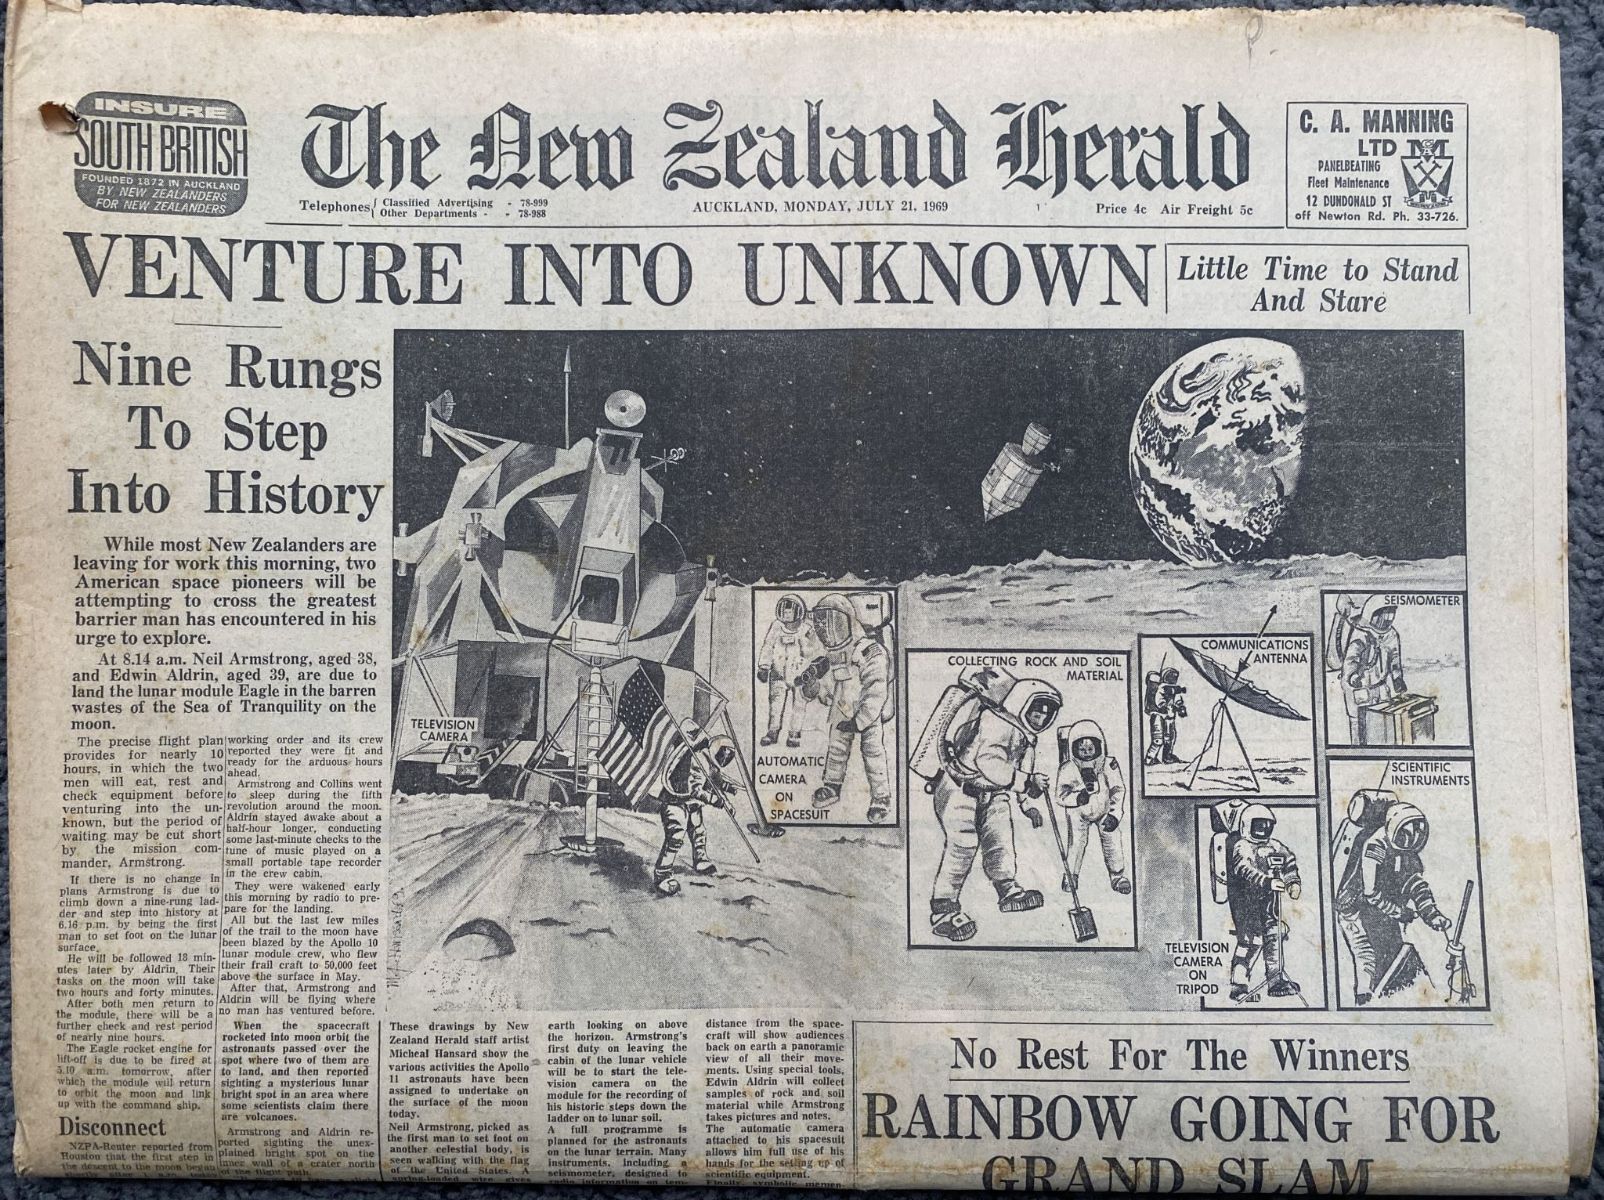 OLD NEWSPAPER: The New Zealand Herald, 21 July 1969 - Moon Landing Special